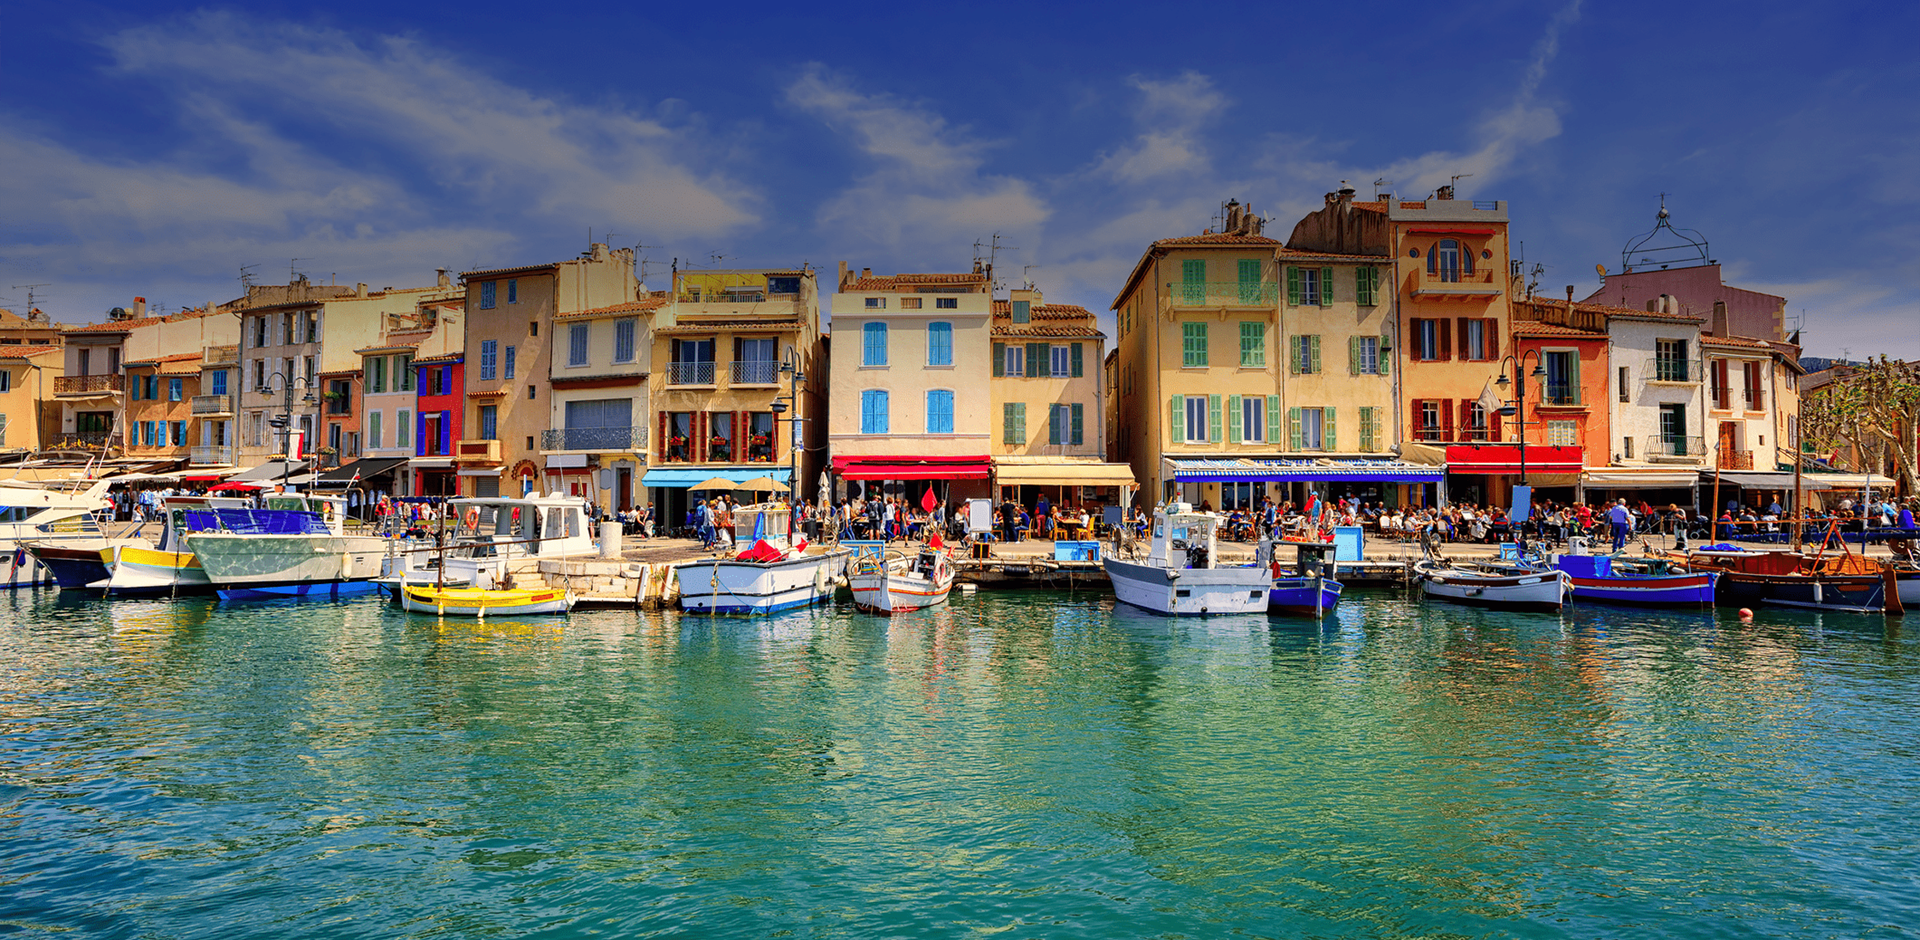 View from the water on Cassis old town port promenade with colourful small houses and boats, Provence, France